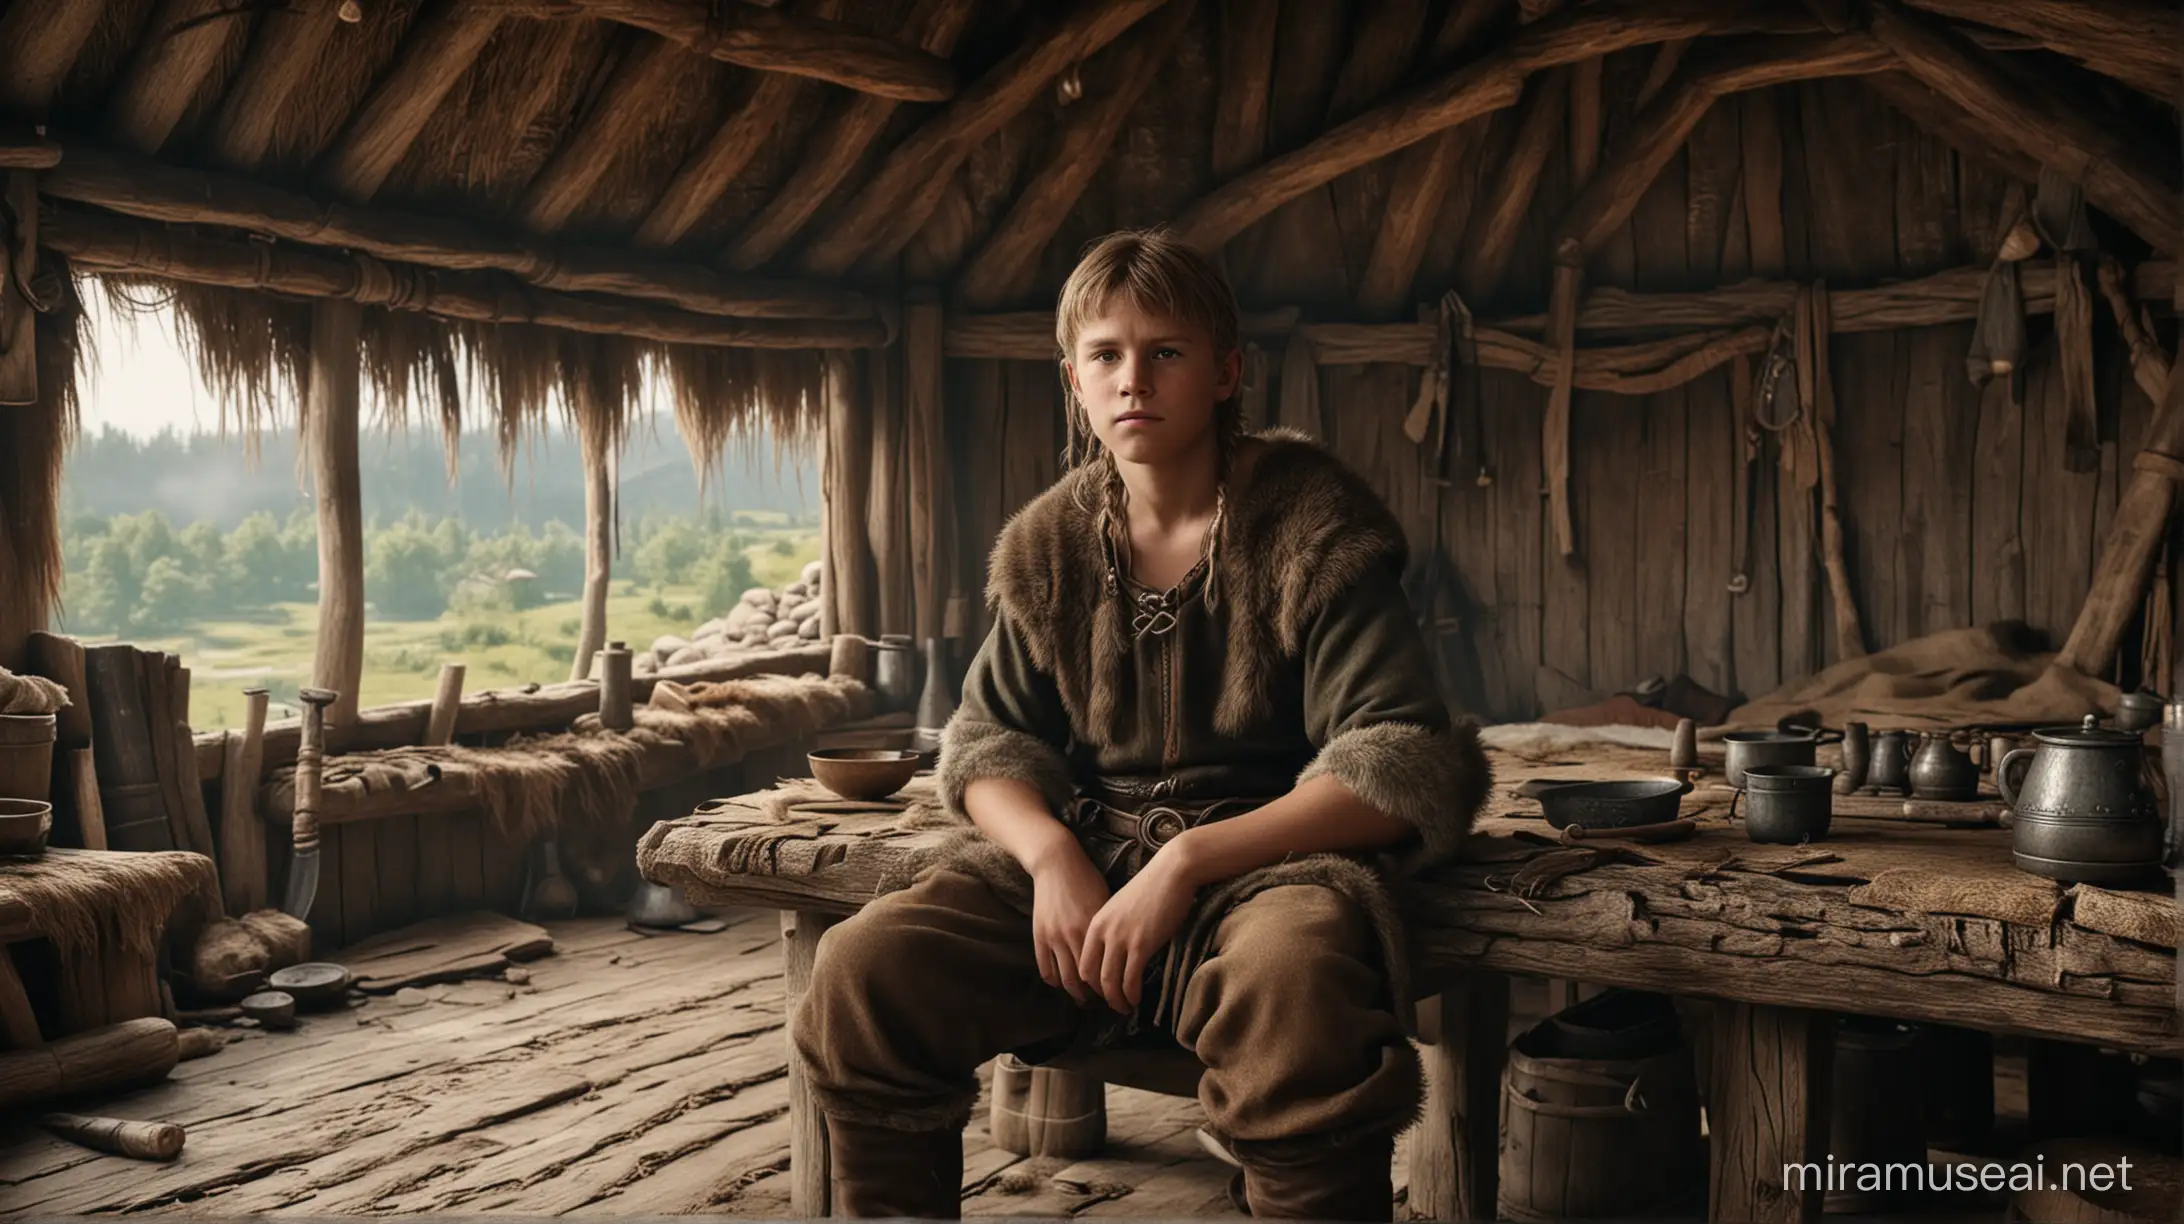 Vibrant Photorealistic Depiction of a 13YearOld Viking Warriors Son in His Village Hut